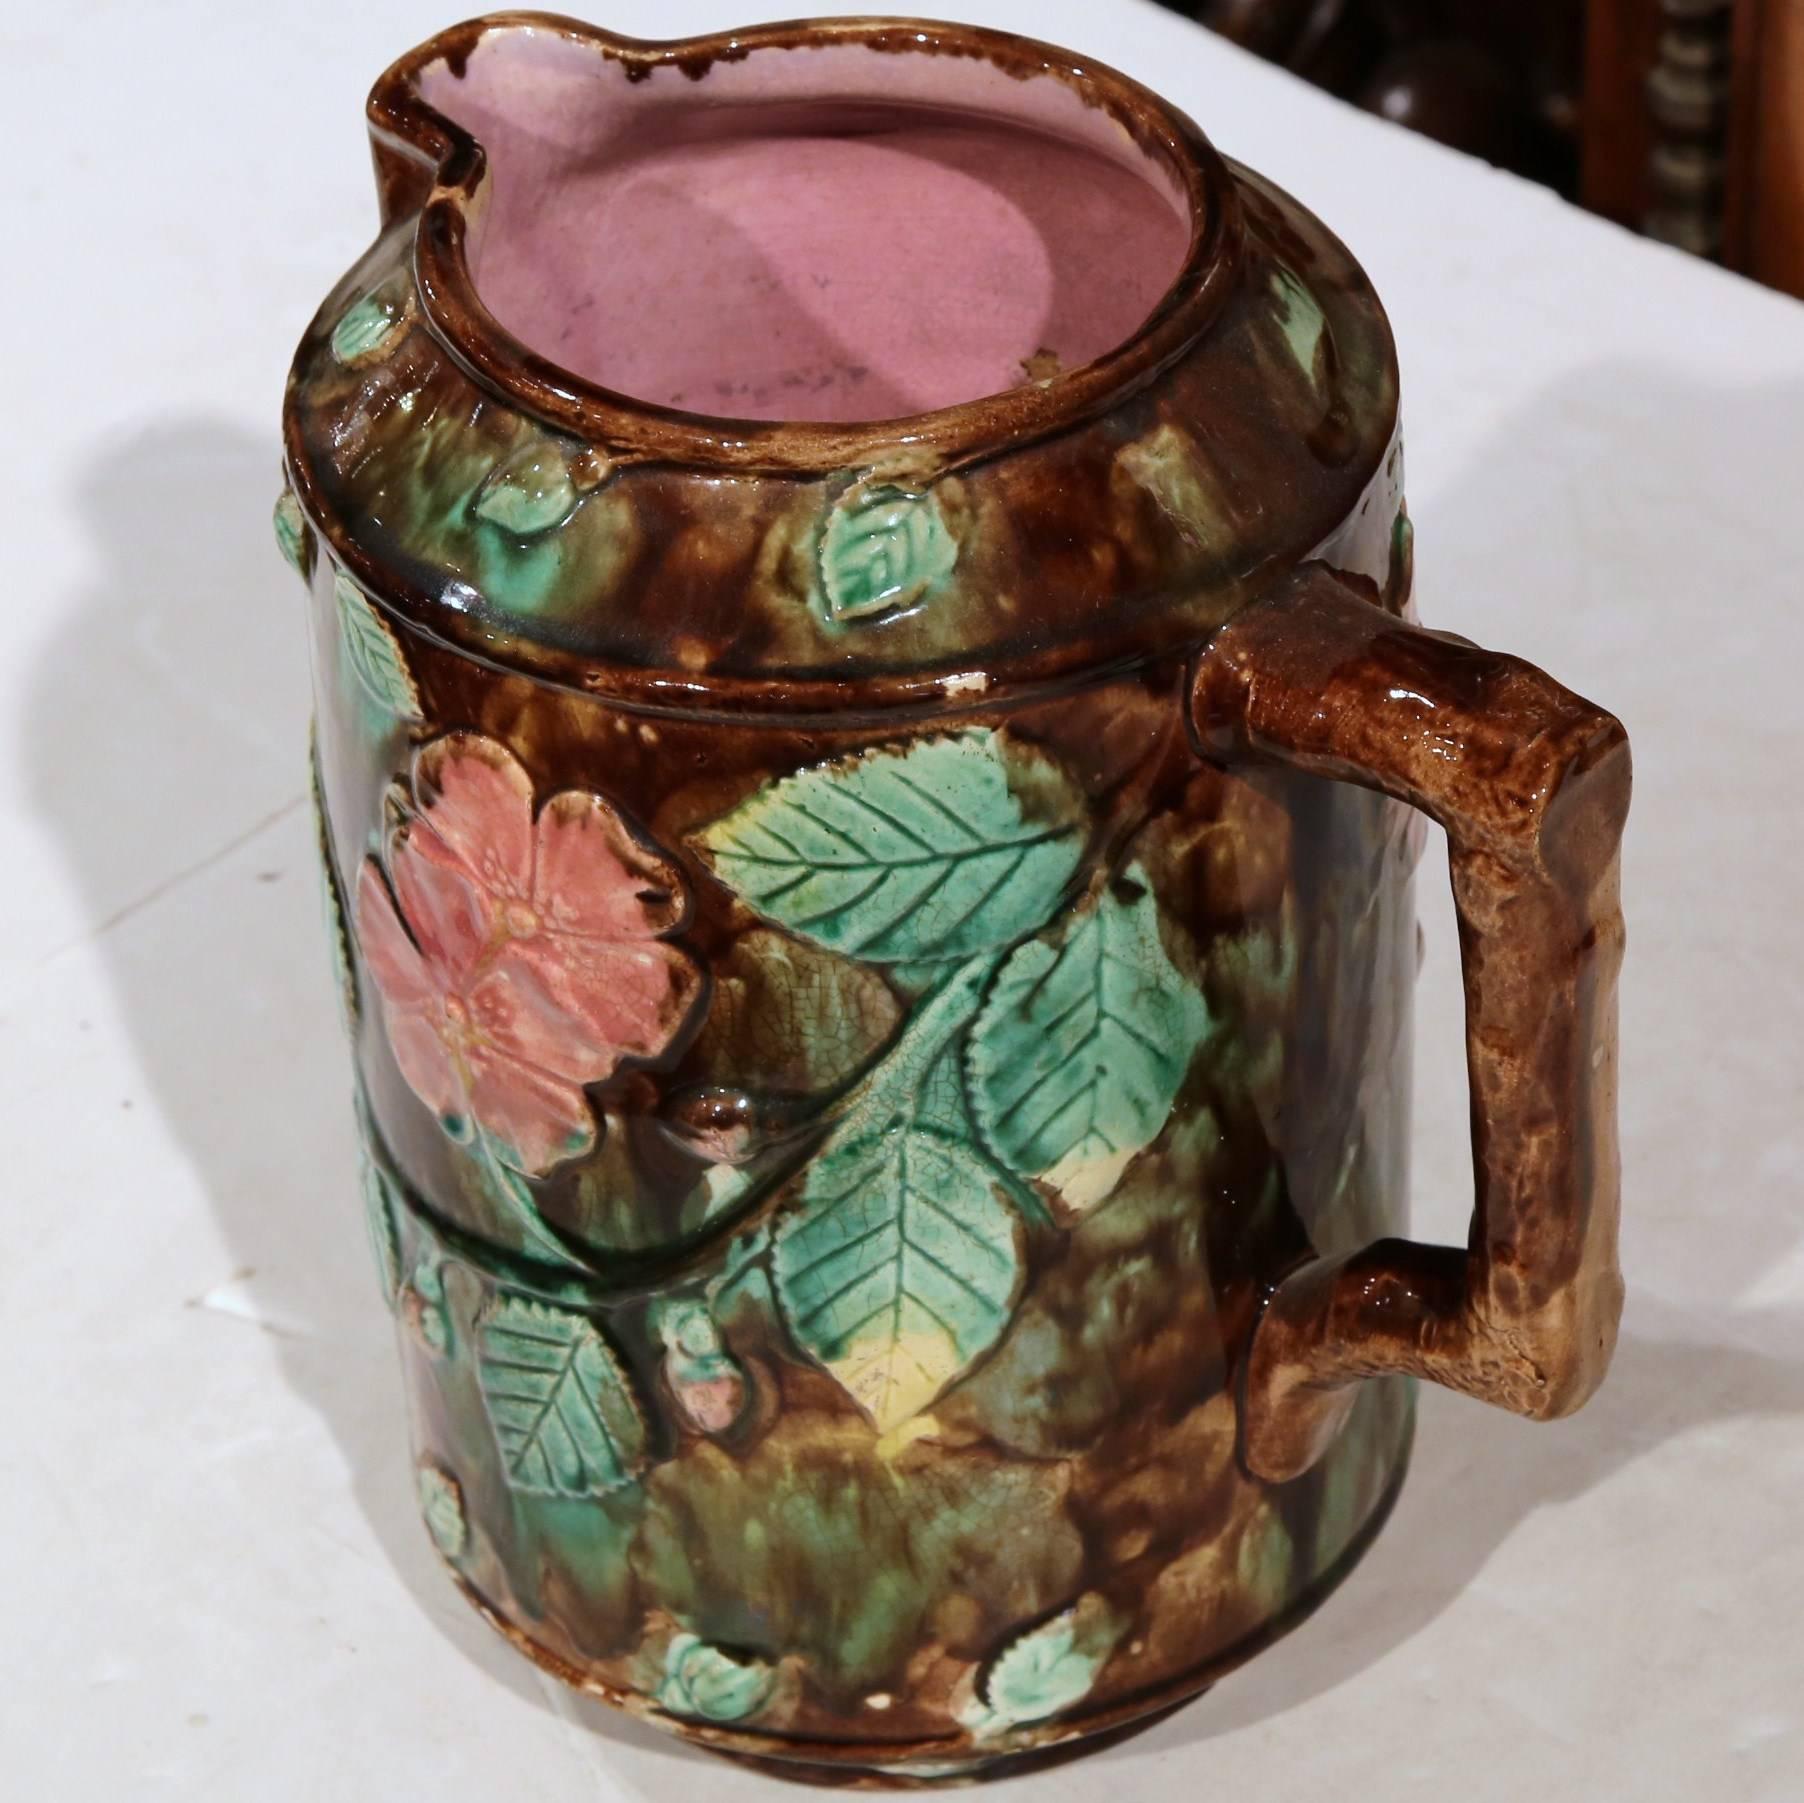 This colorful antique hand painted Majolica pitcher was crafted in France, circa 1870. The large ceramic water pitcher features a side handle, a pouring beek on the opposite side, and is embellished with green leaves, pink flowers and nuts. The